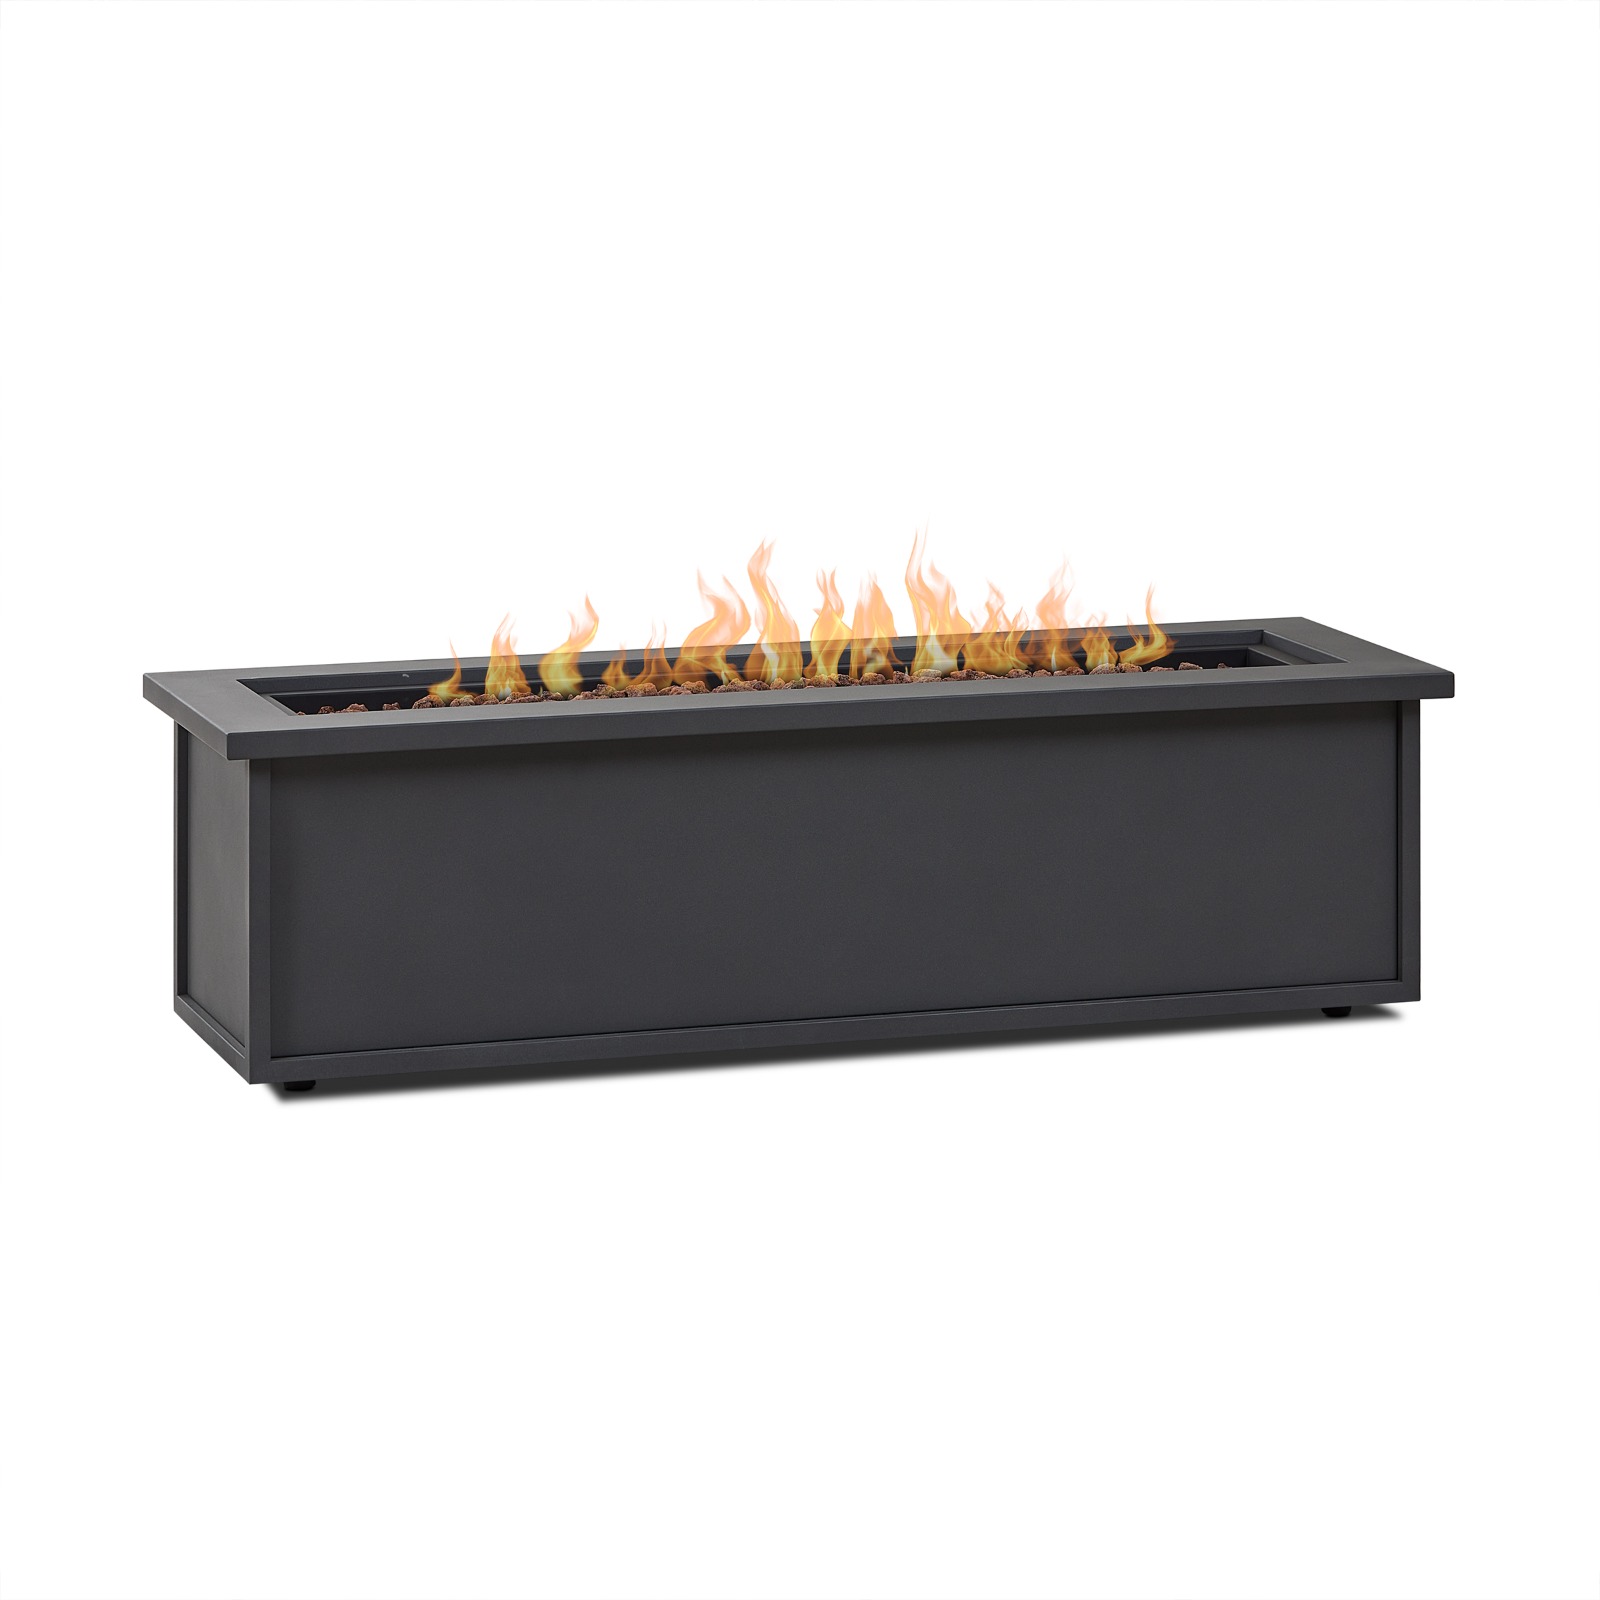 Mila Propane Fire Pit Fire Bowl Outdoor Fireplace Fire Table for Backyard or Patio